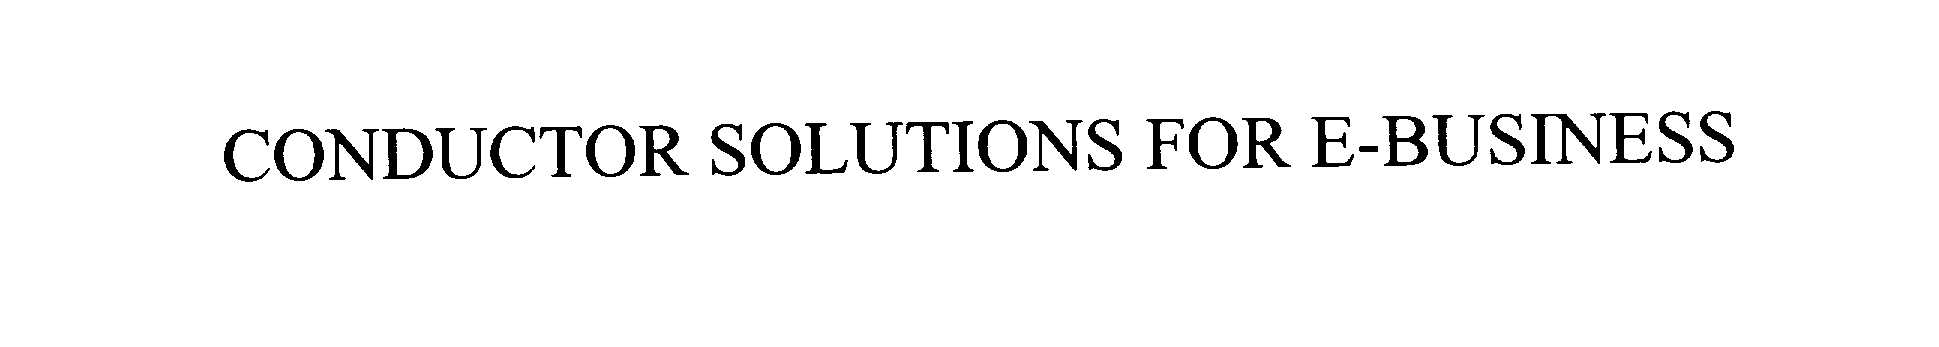  CONDUCTOR SOLUTIONS FOR E-BUSINESS